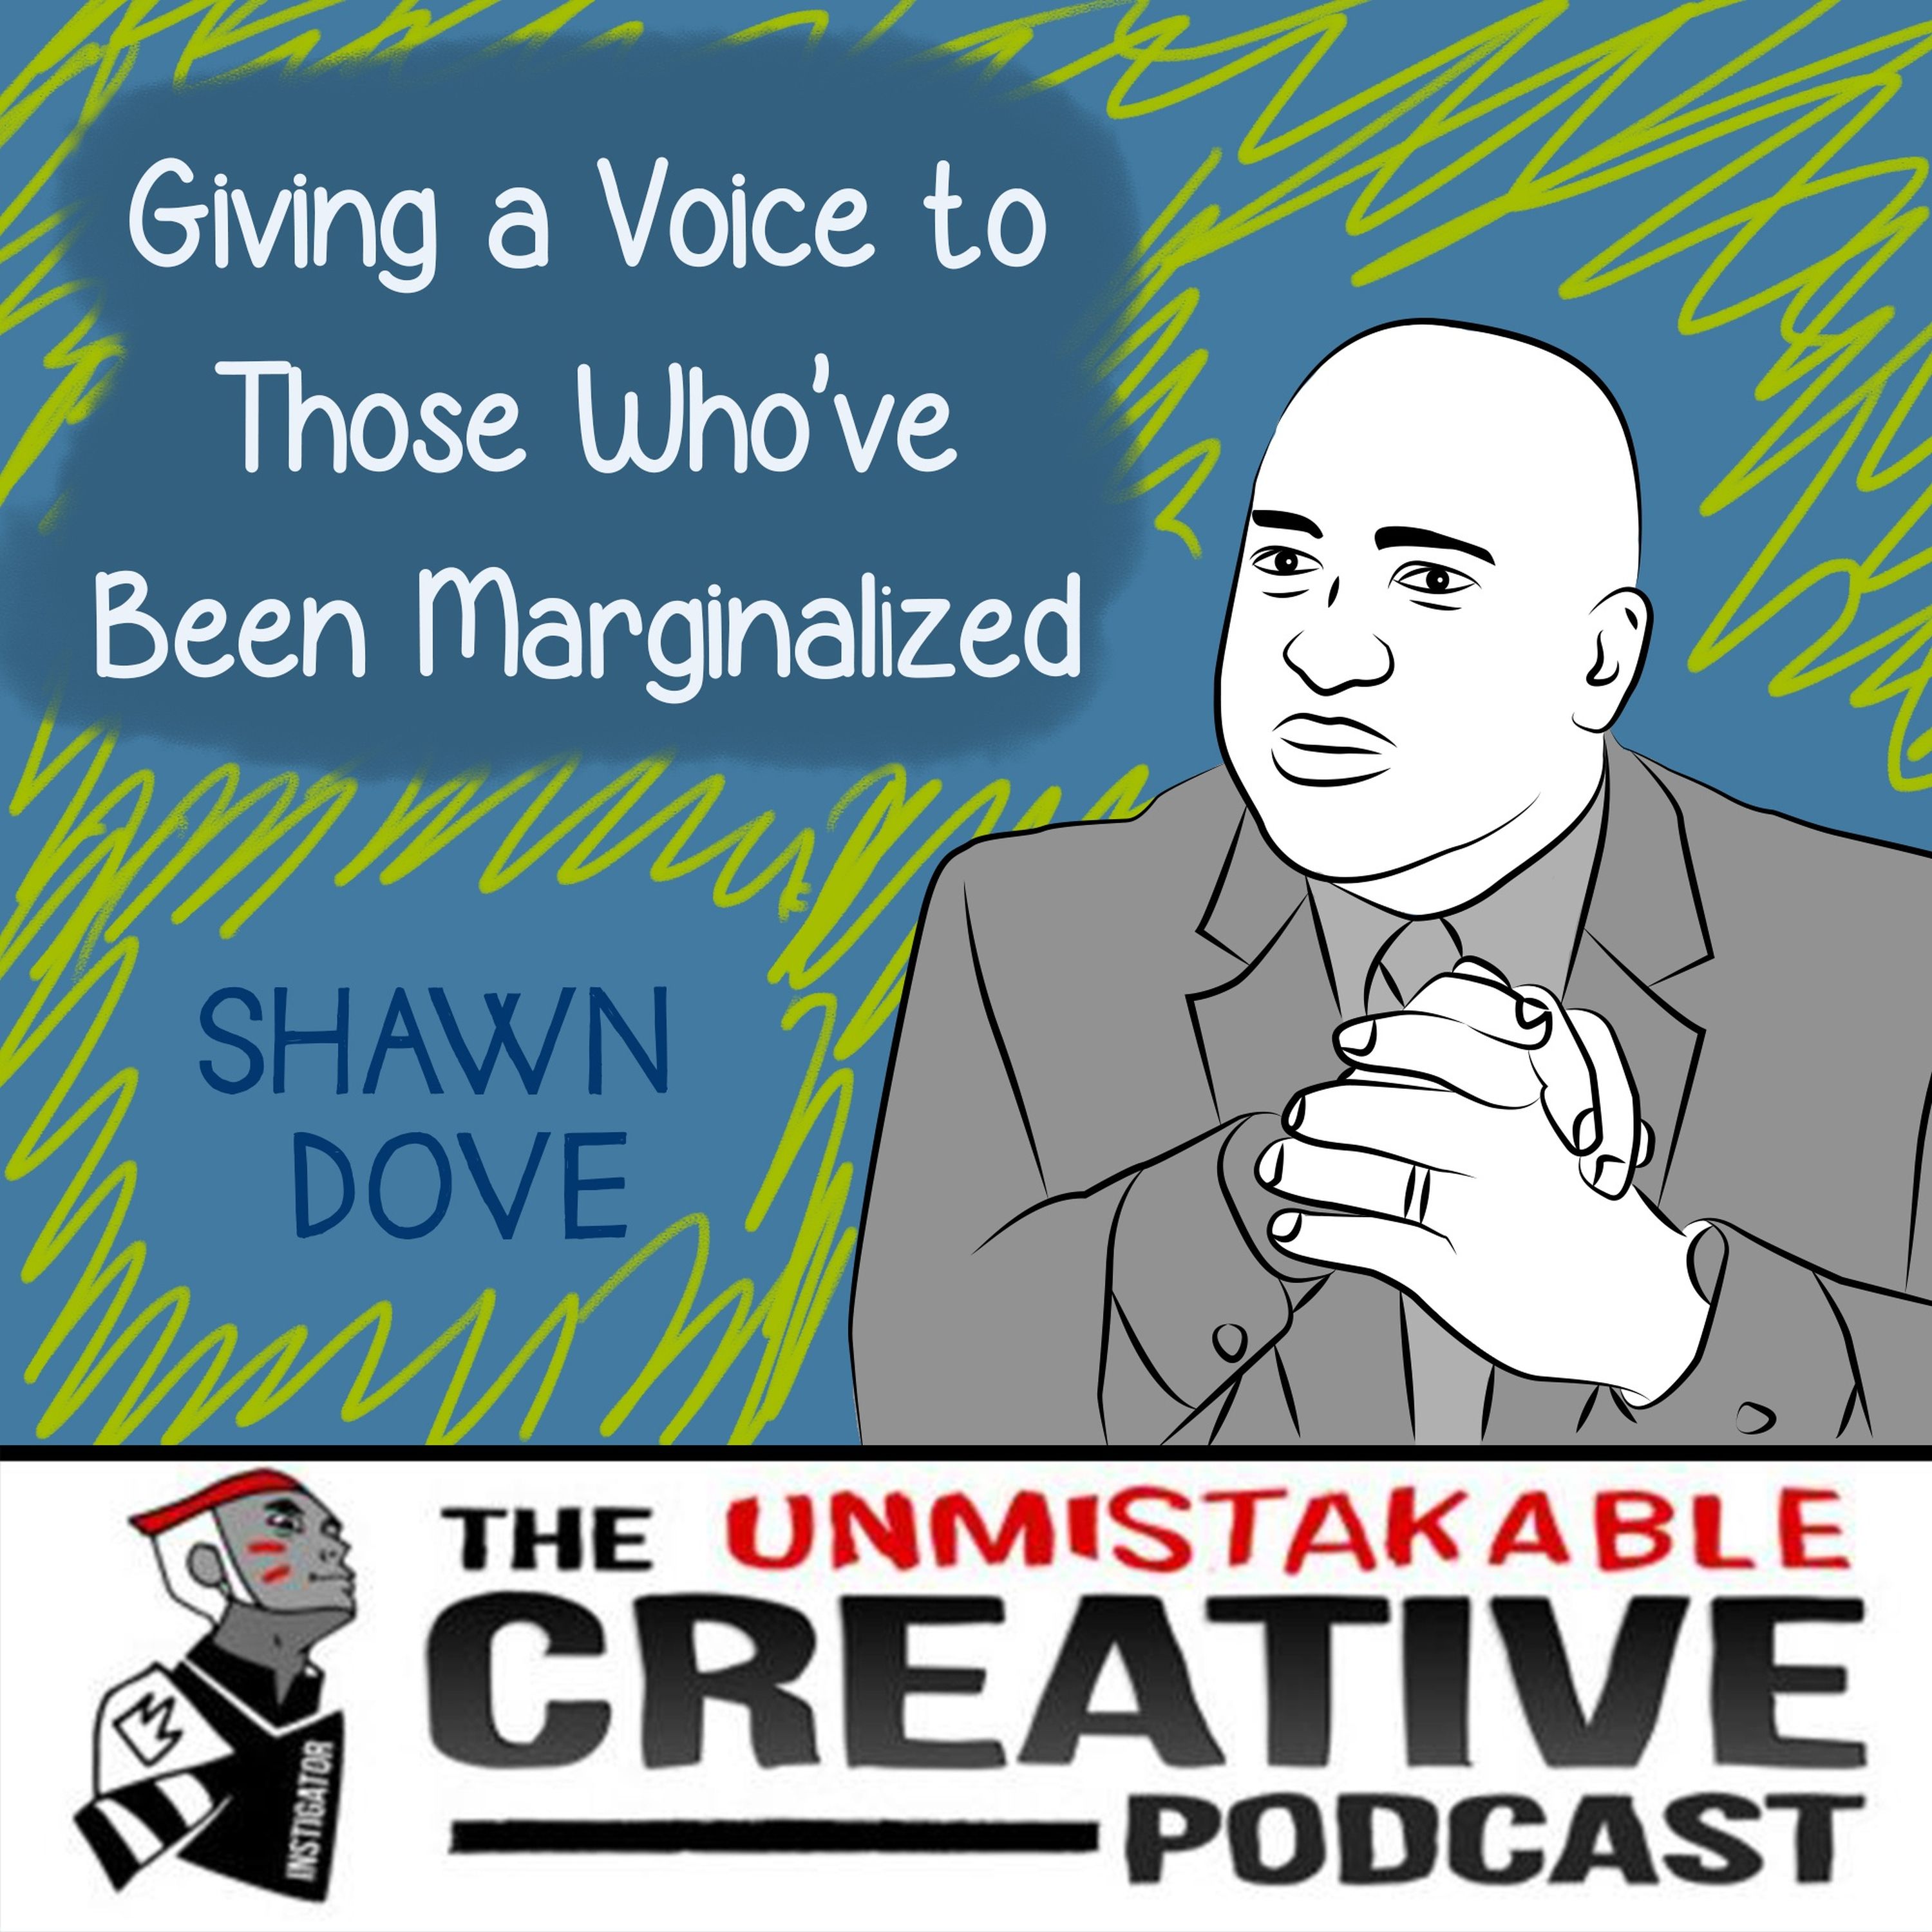 Best of 2019: Shawn Dove: Giving a Voice to Those Who've Been Marginalized